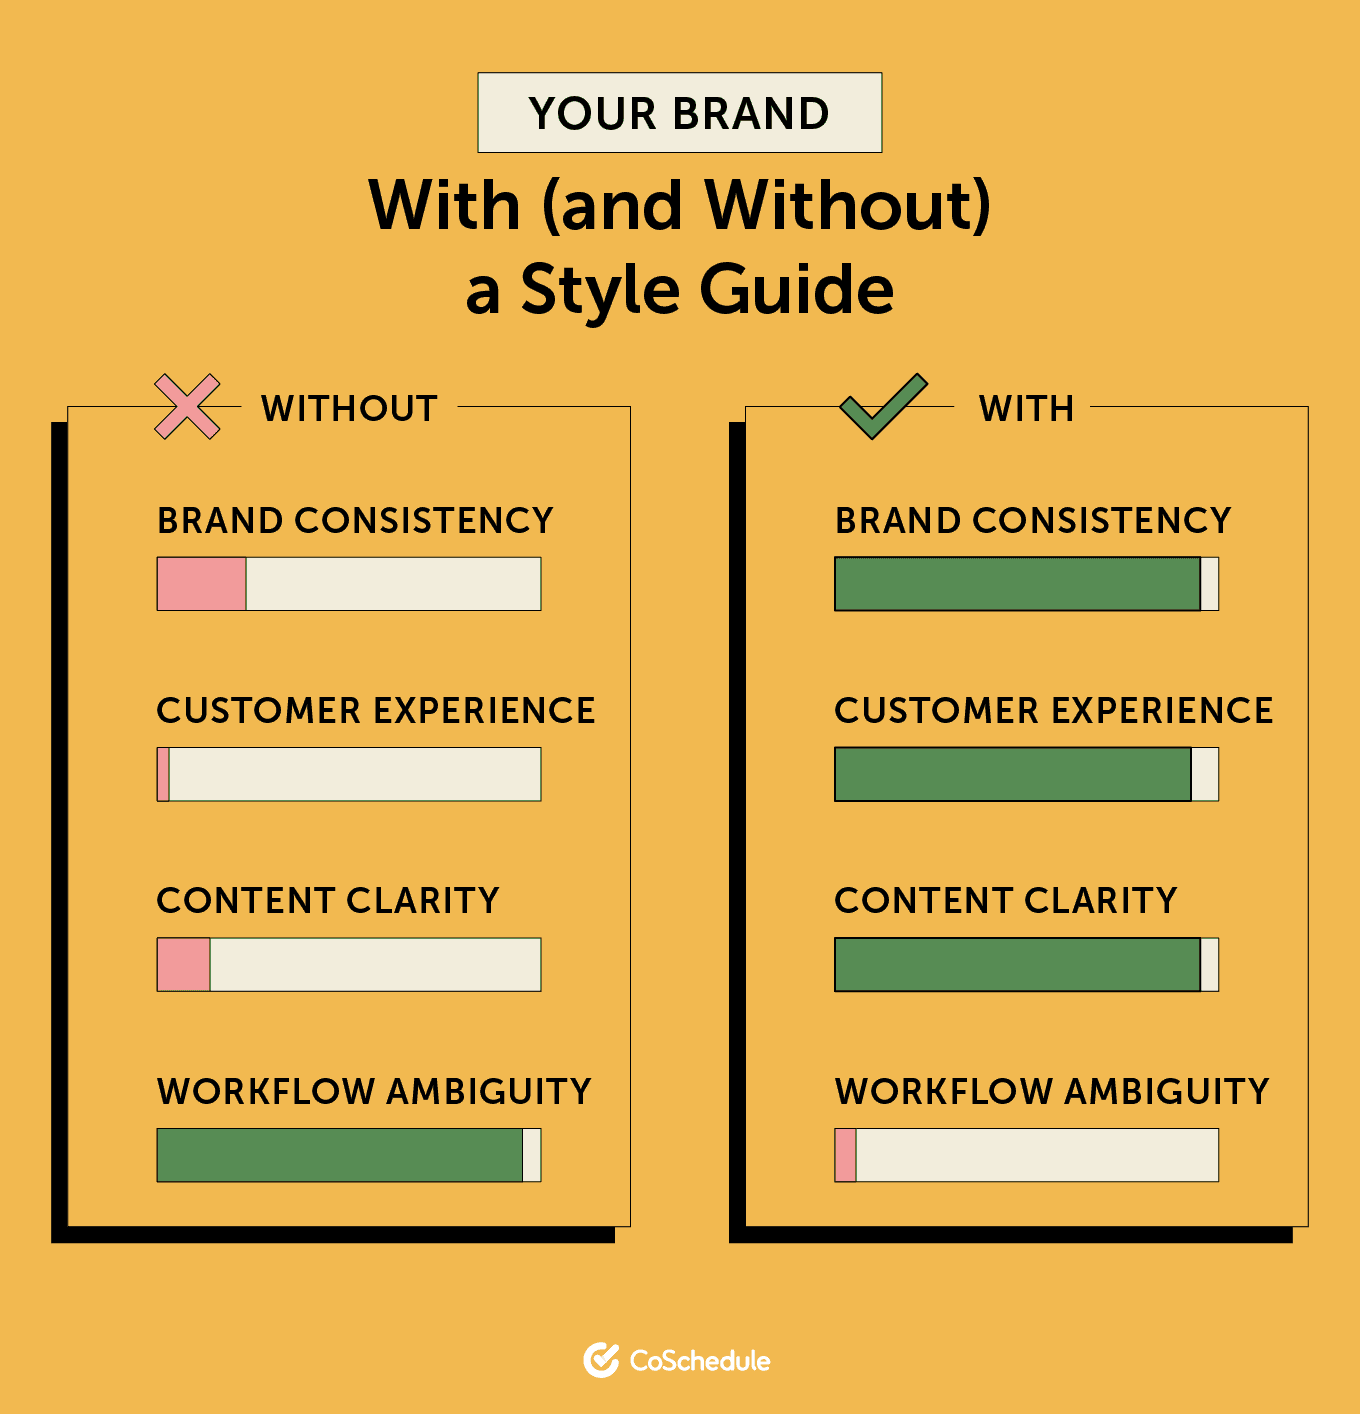 Your brand: with and without a style guide pros and cons